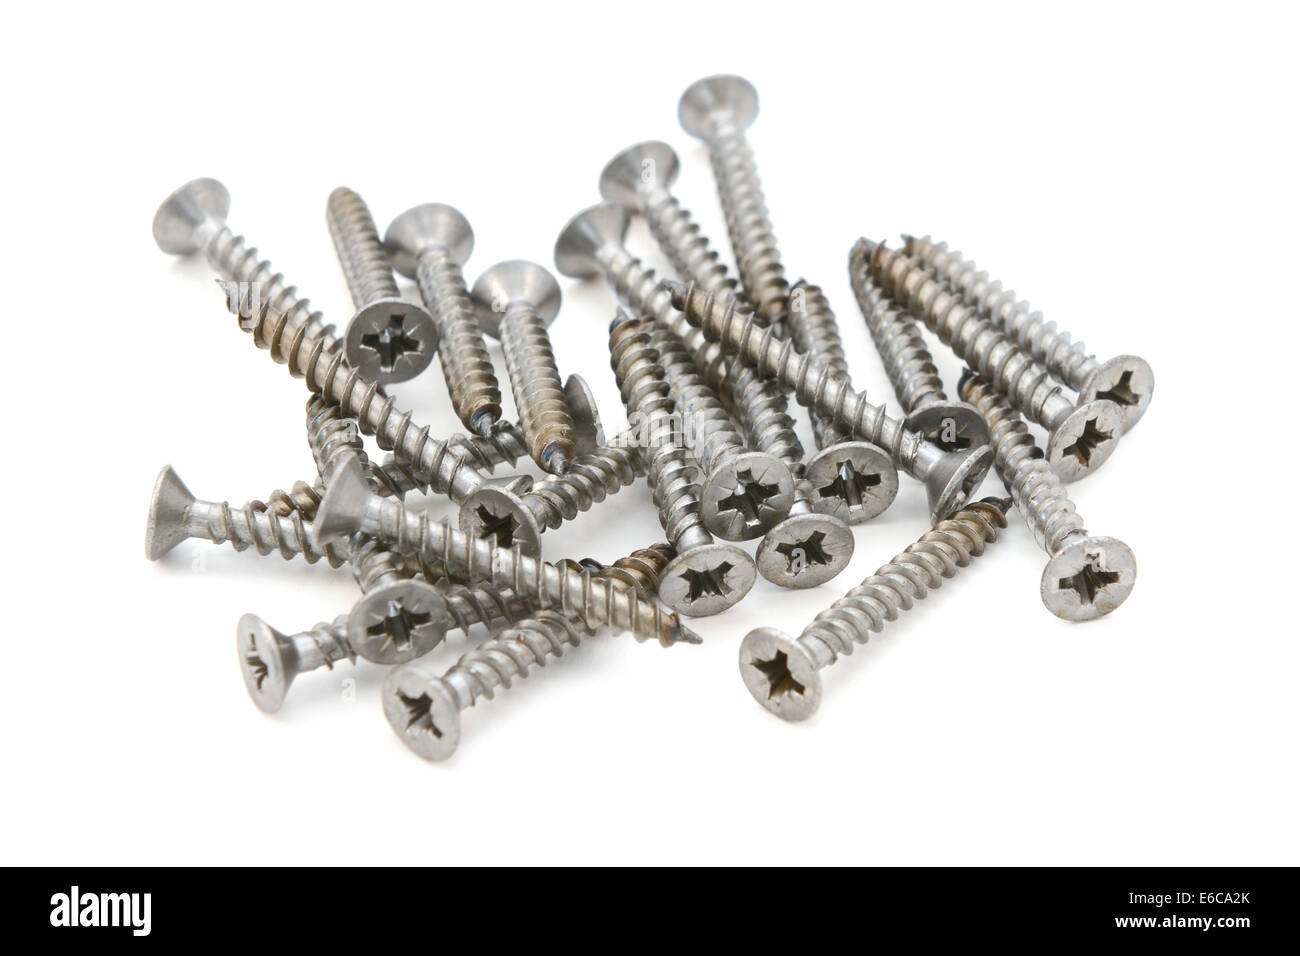 Pozi drive self-tapping screws, isolated on a white background Stock Photo